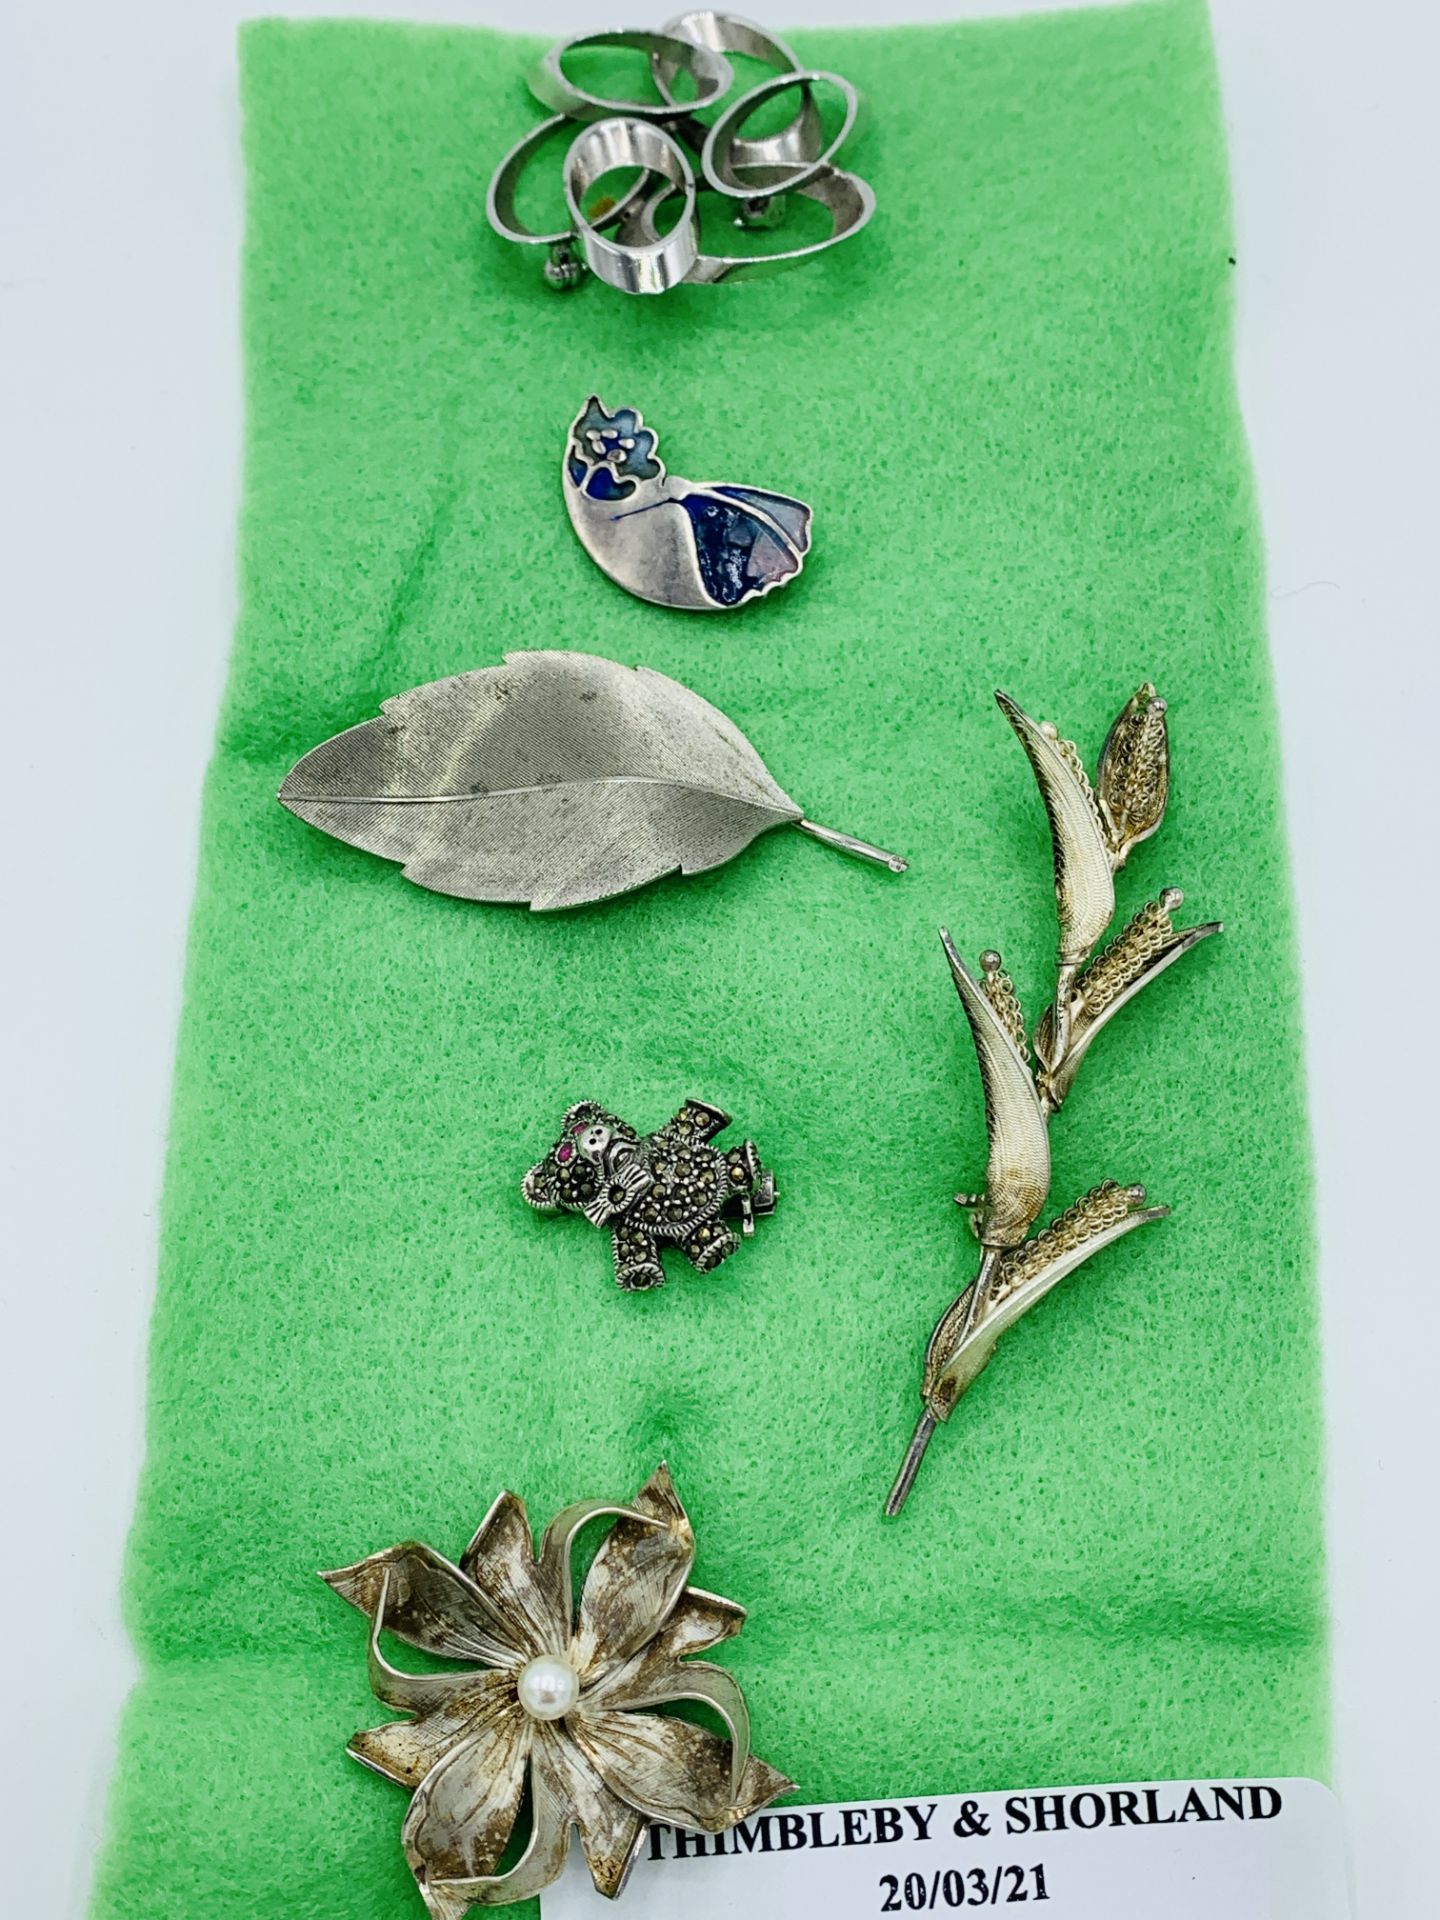 Six sterling silver brooches